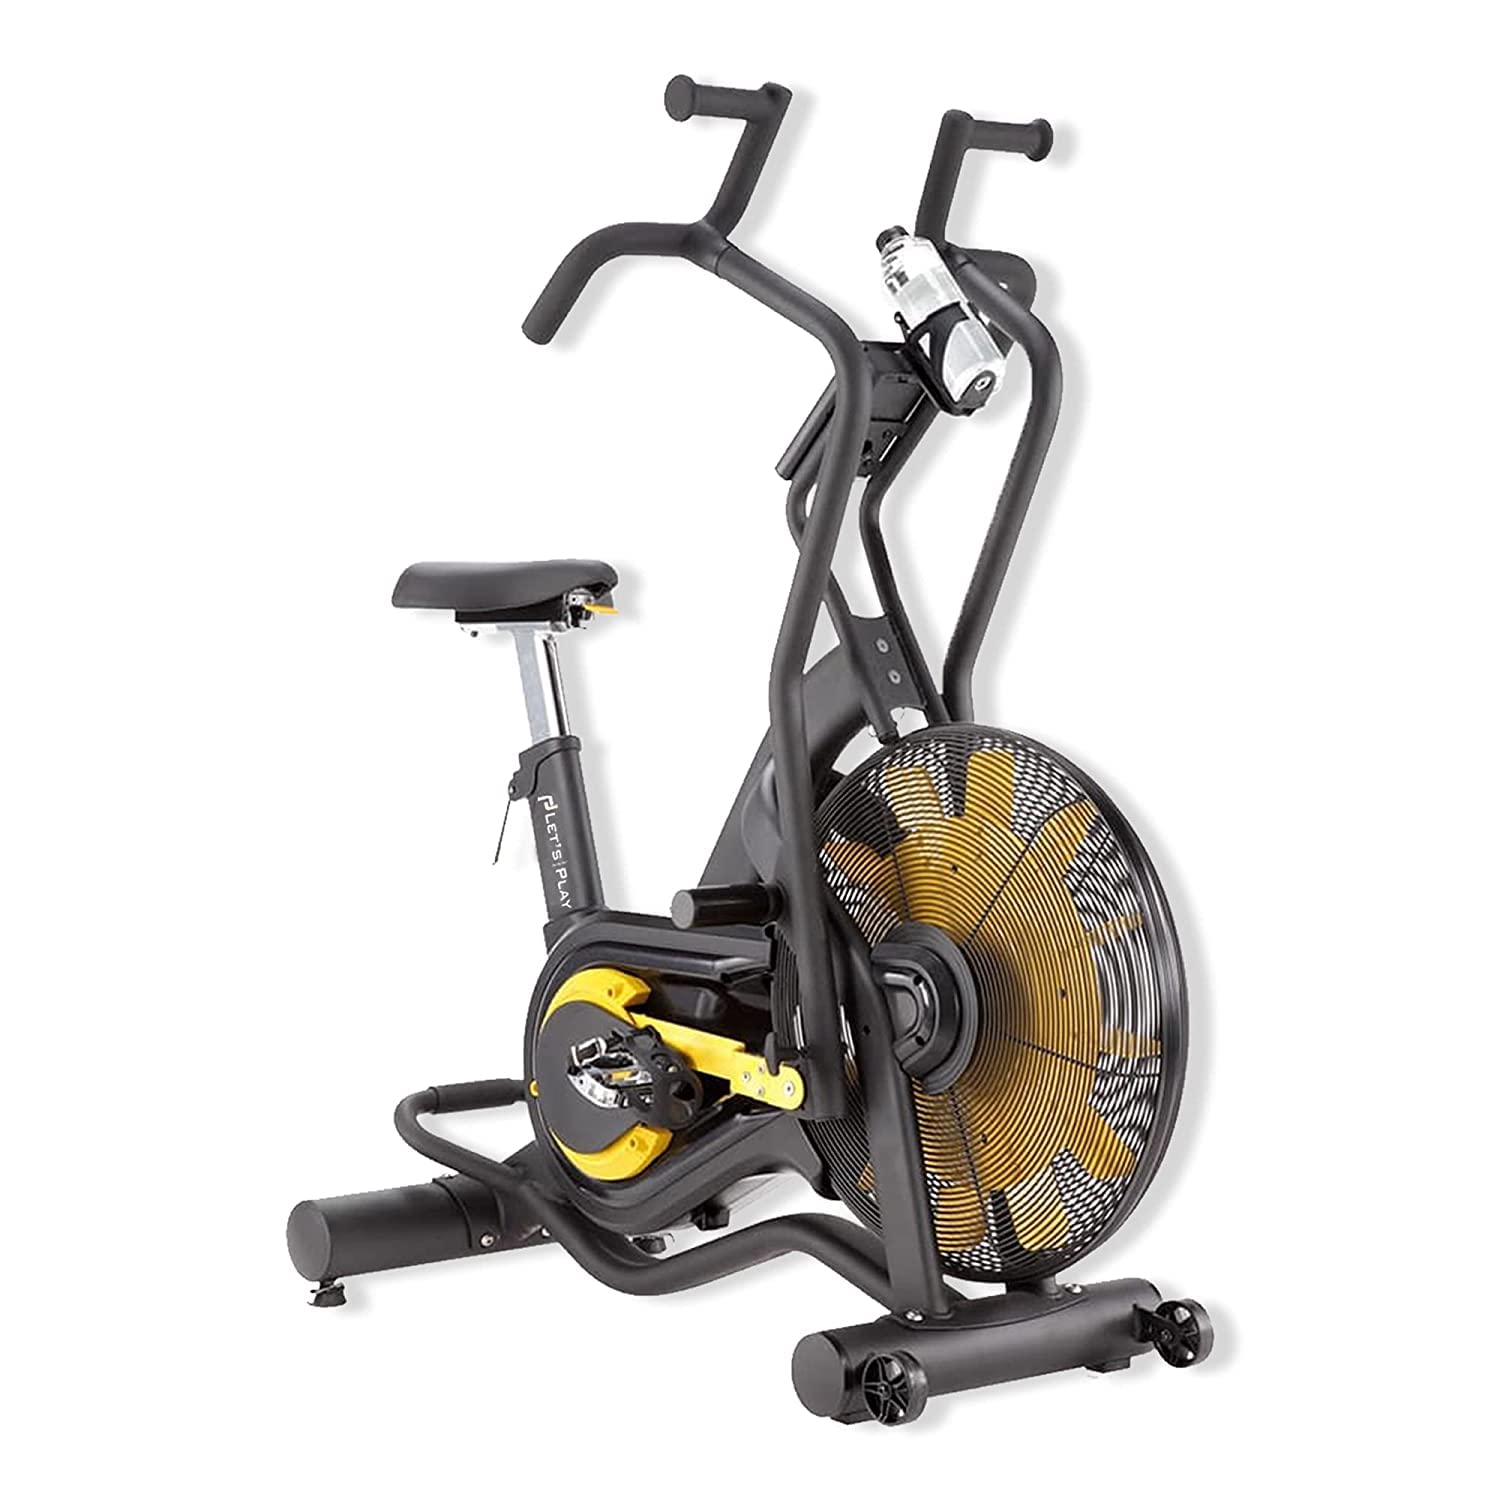 Let's Play® LP-668 Imported Air Bike Exercise Cycle for Home and Gym